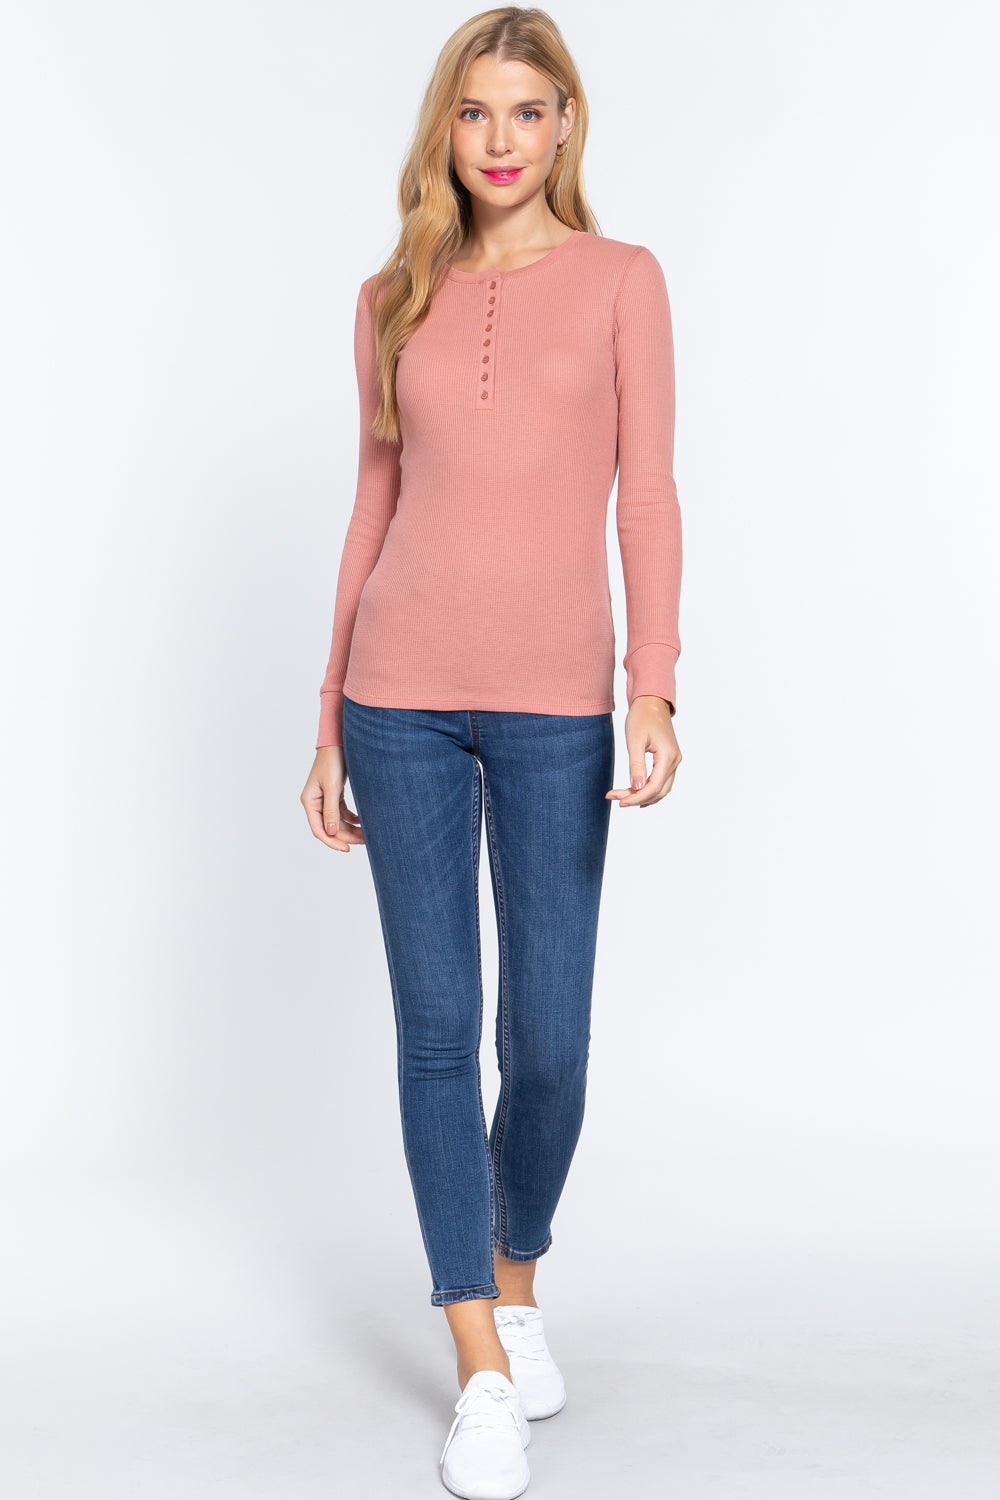 Pink Long Sleeve Waffle Knit Stretch Cotton Henley Thermal Top Shirt Shirts & Tops jehouze 